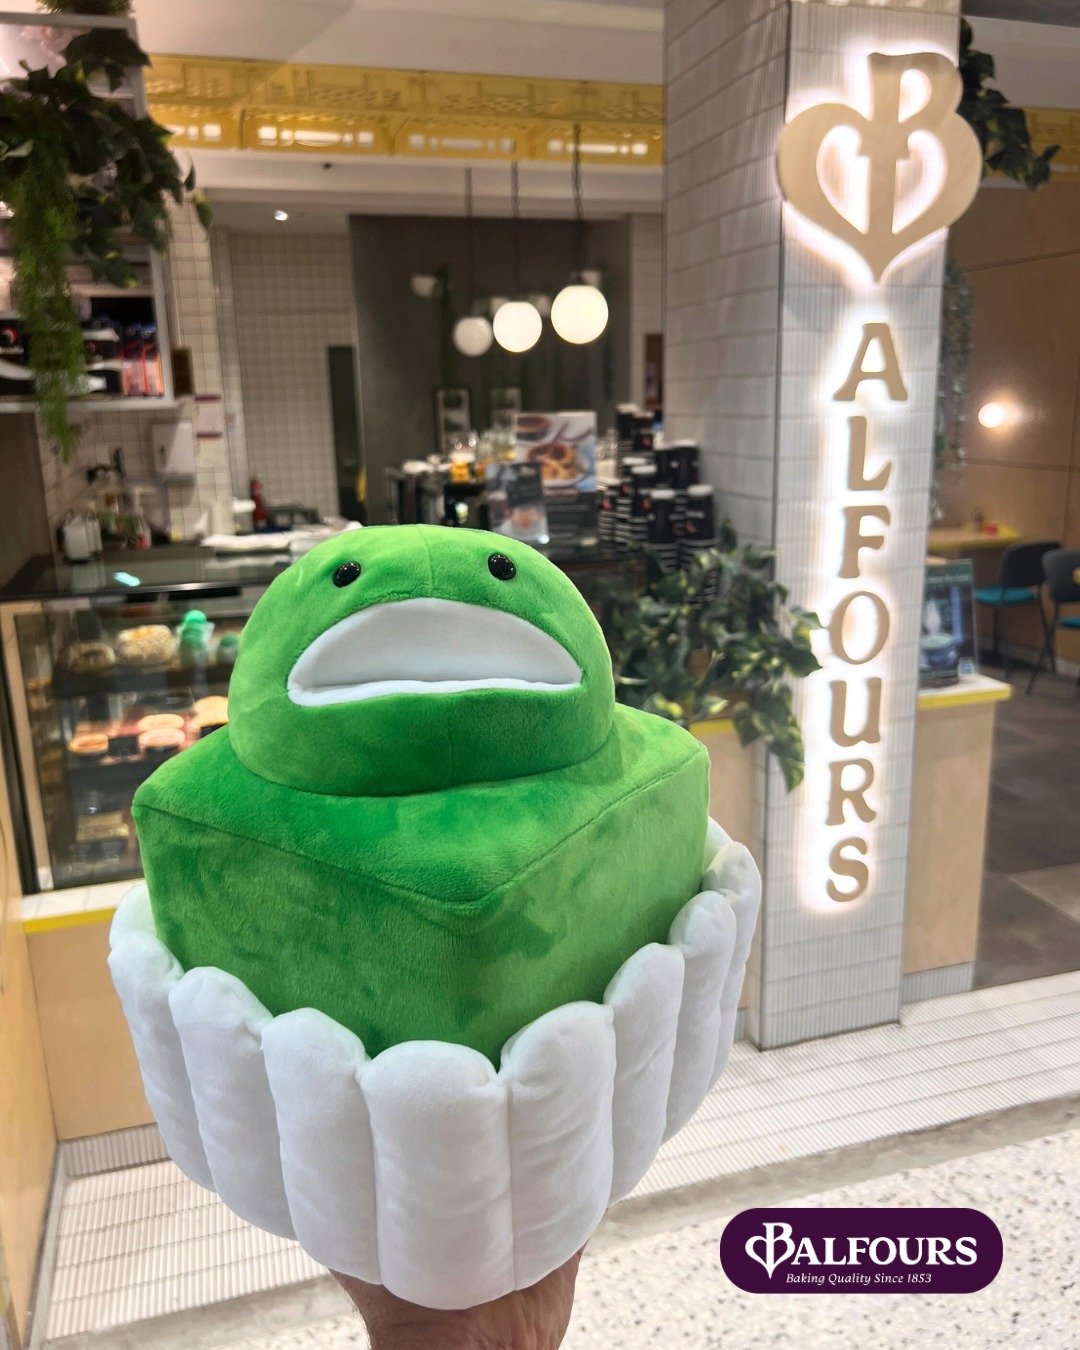 🐸🍰 YOUR VOICES HAVE BEEN HEARD! The wait is finally over. Tomorrow is Frog Cake Friday!
When you spend $20 or more at any Balfours Cafe, you can take home your very own adorable FREE frog plushie! 
Make sure to arrive early as frog plushies are lim